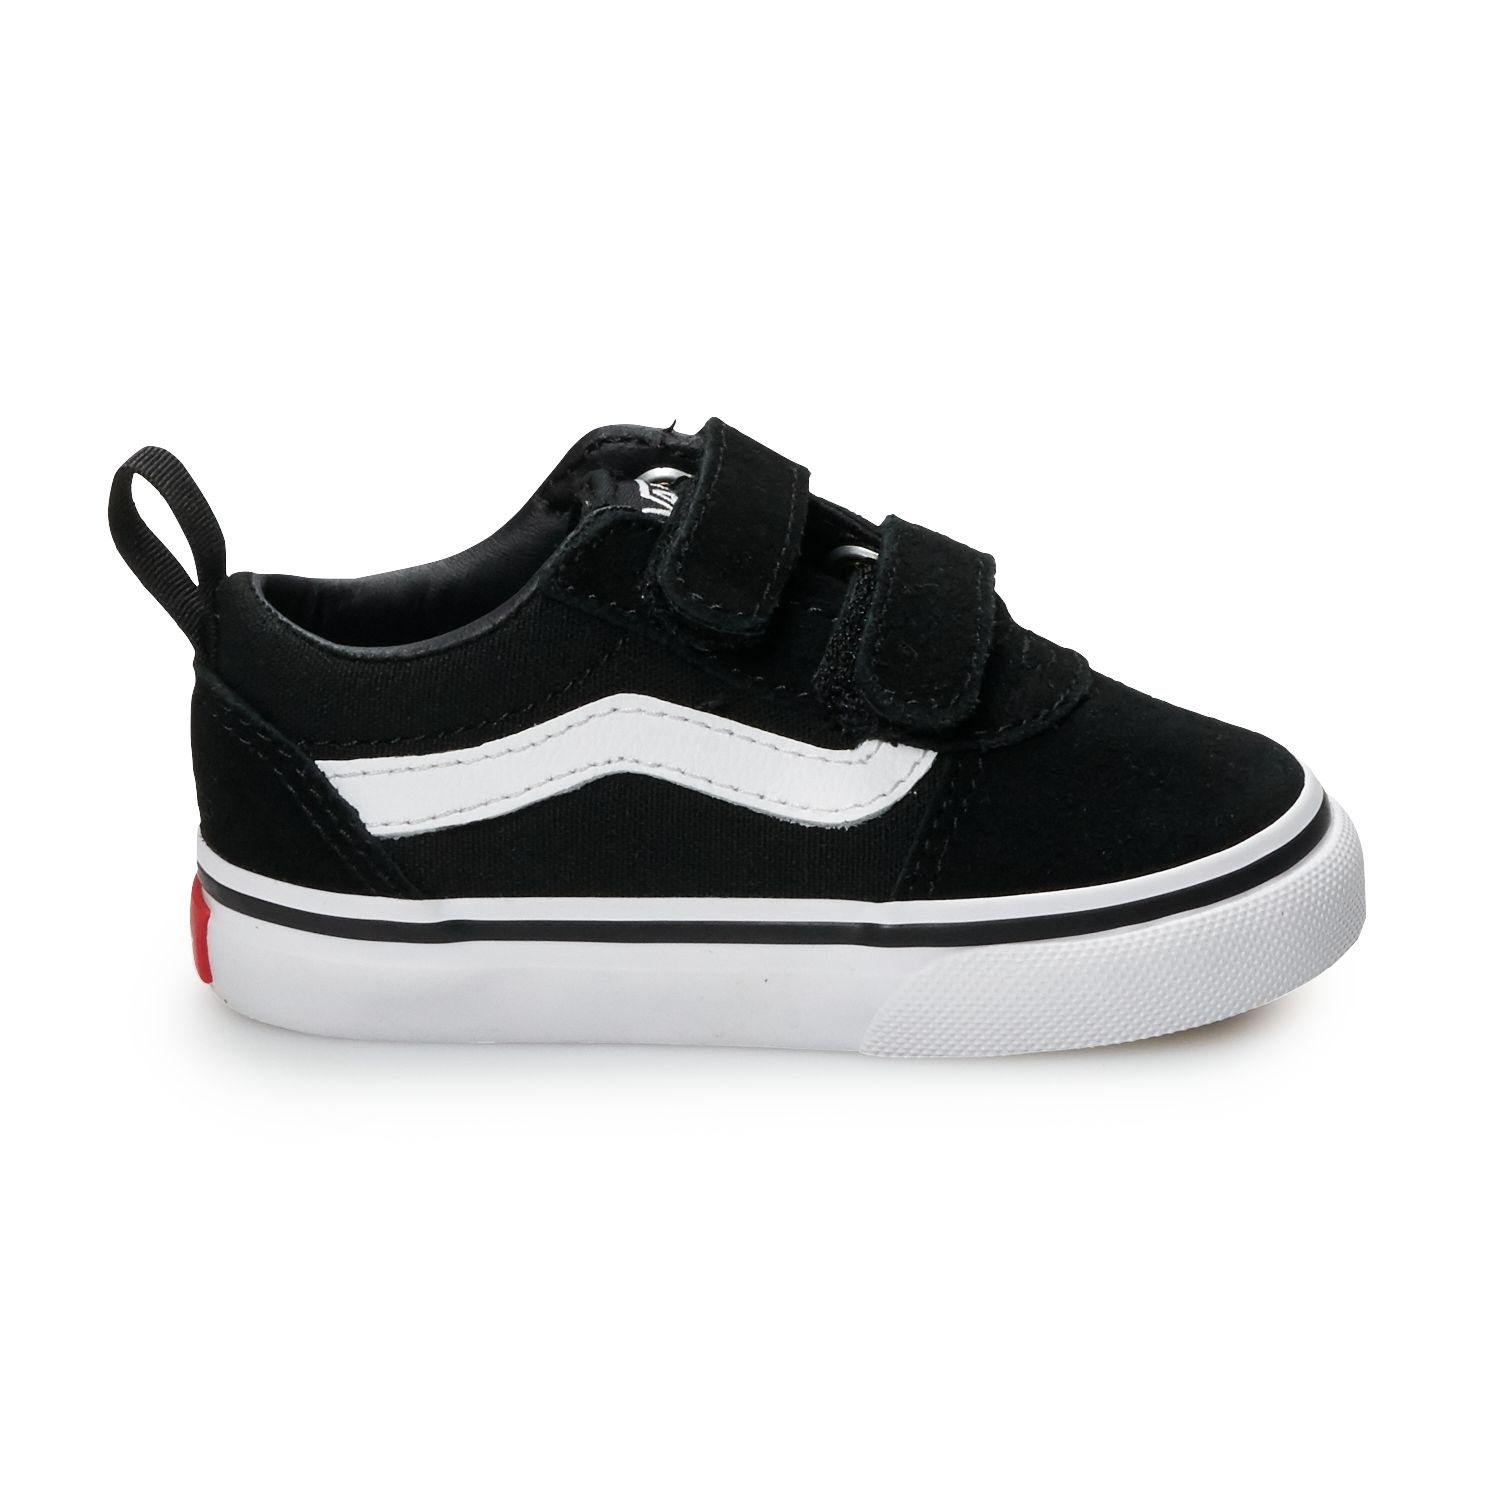 Vans Shoes: Shop Cool Vans Sneakers in Checkered, Slip On & High Top Style  | Kohl's